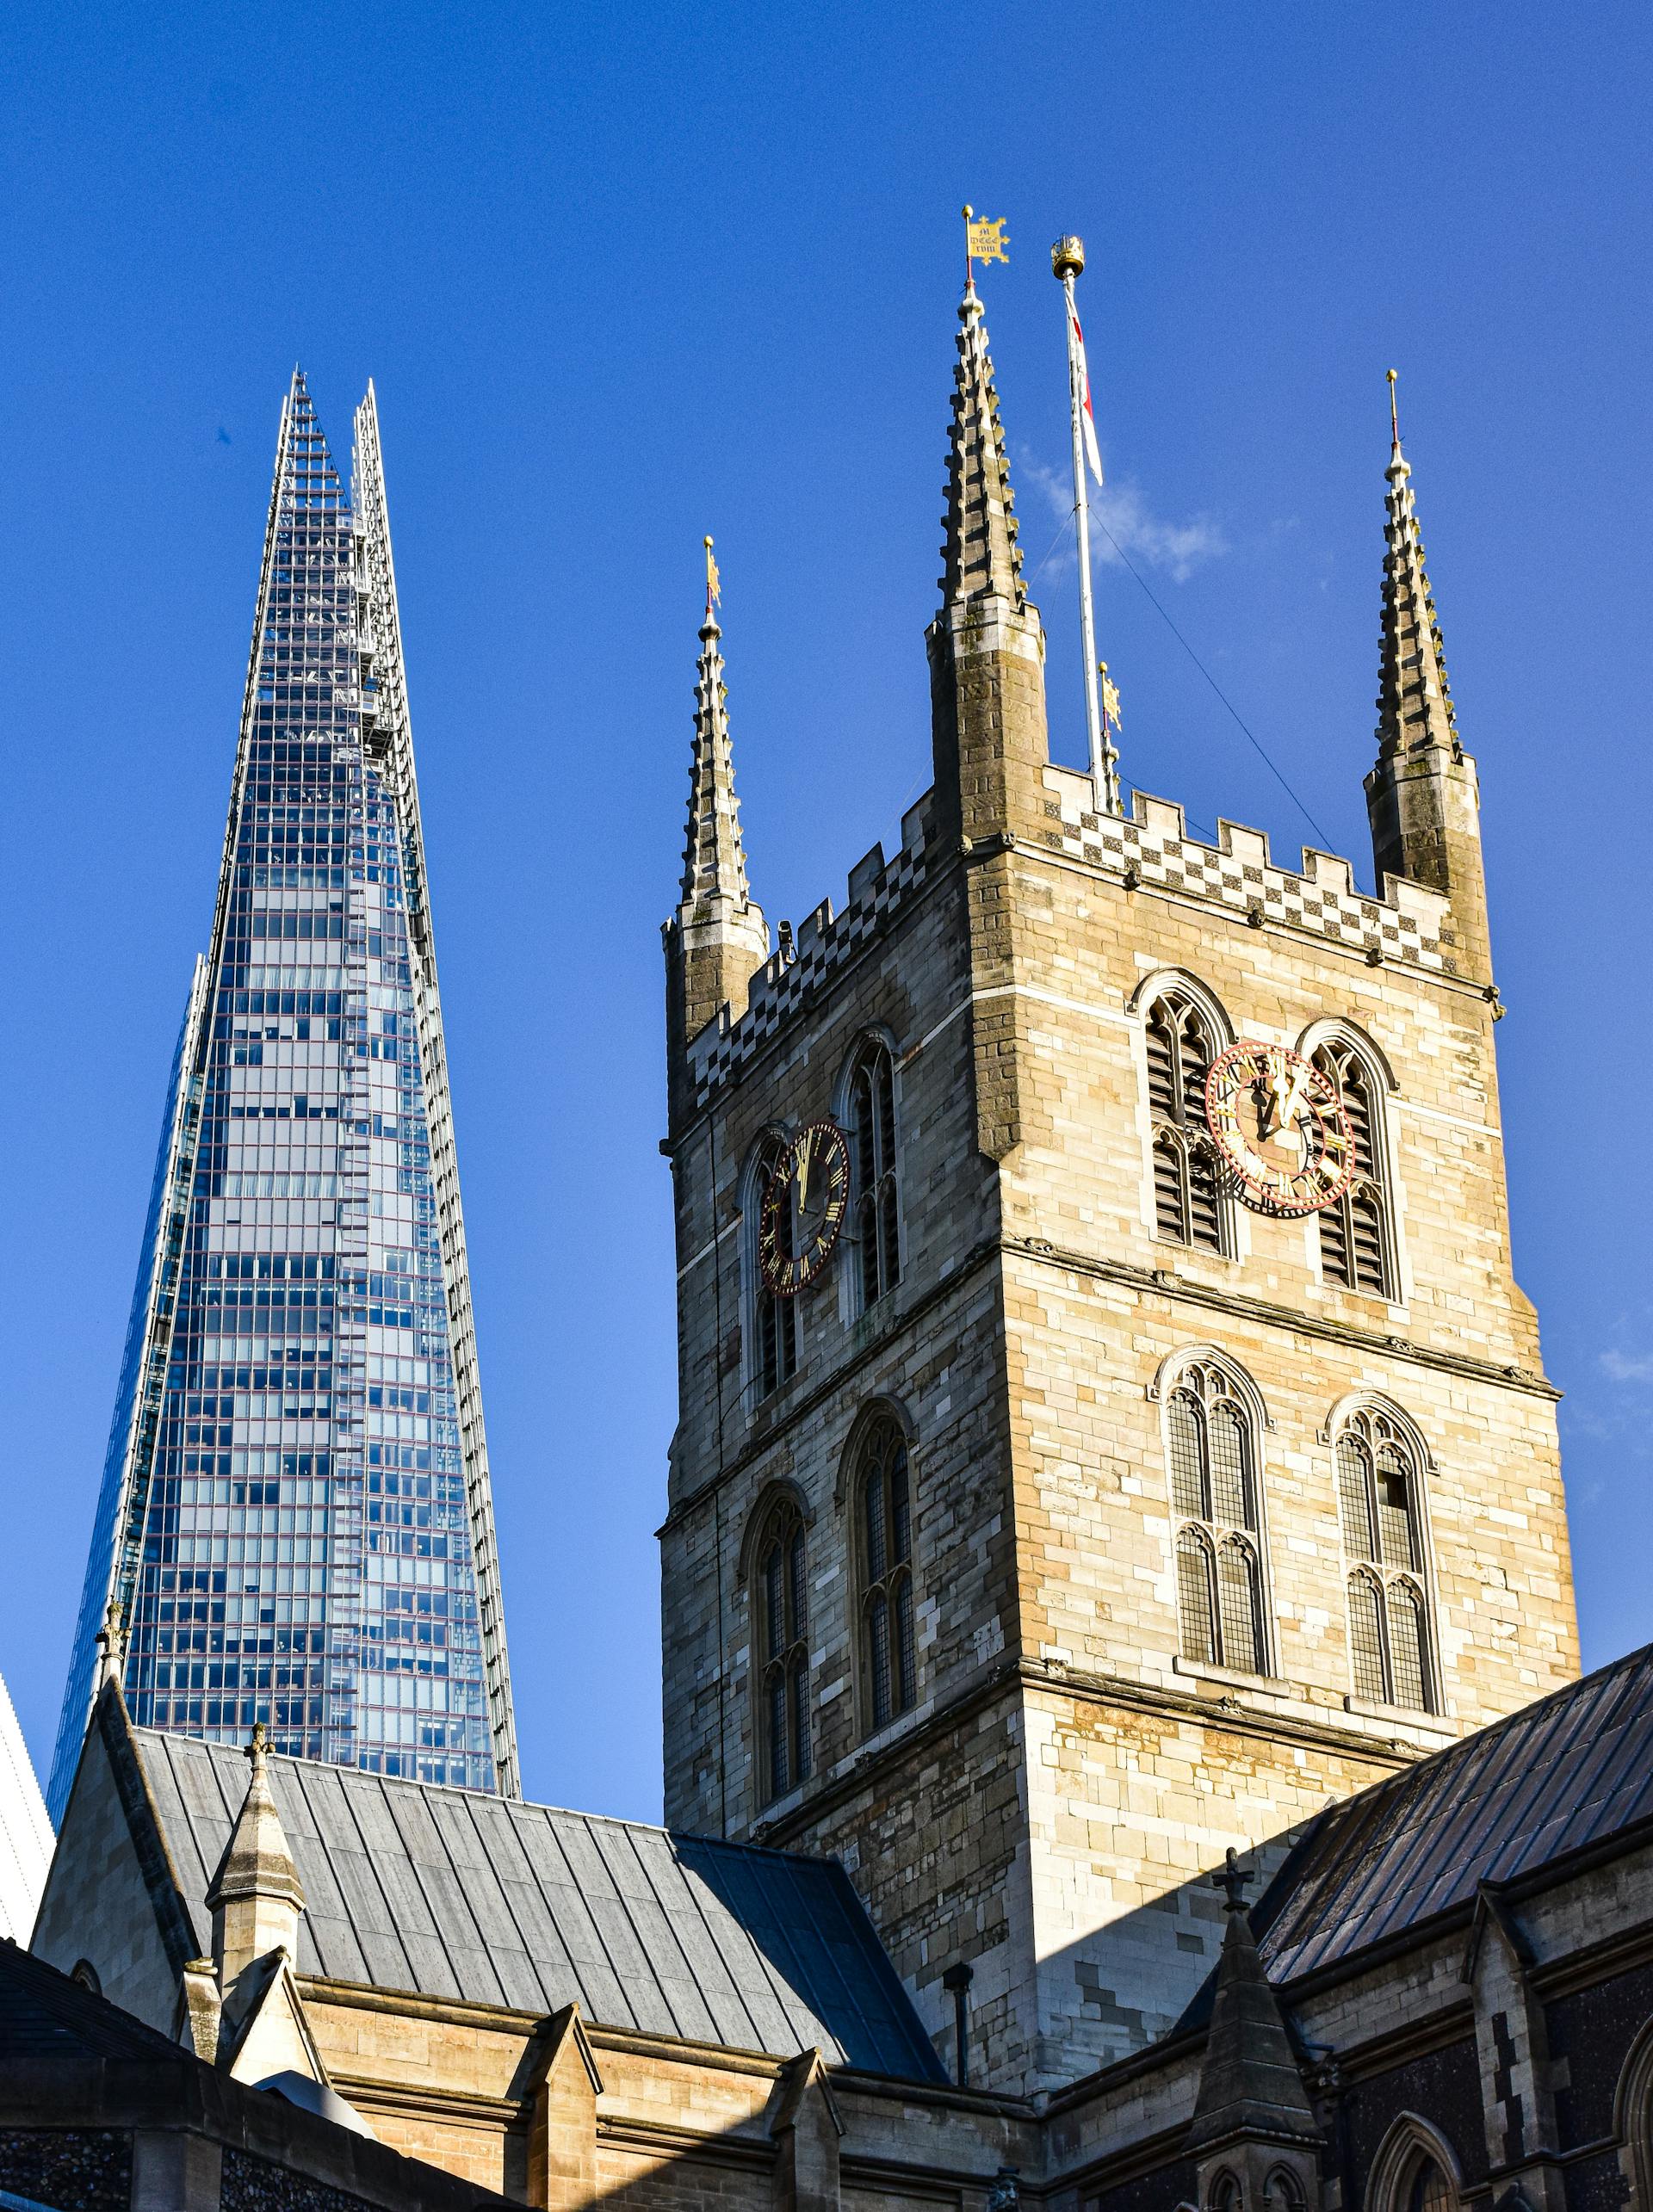 Southwark cathedral next to the Shard